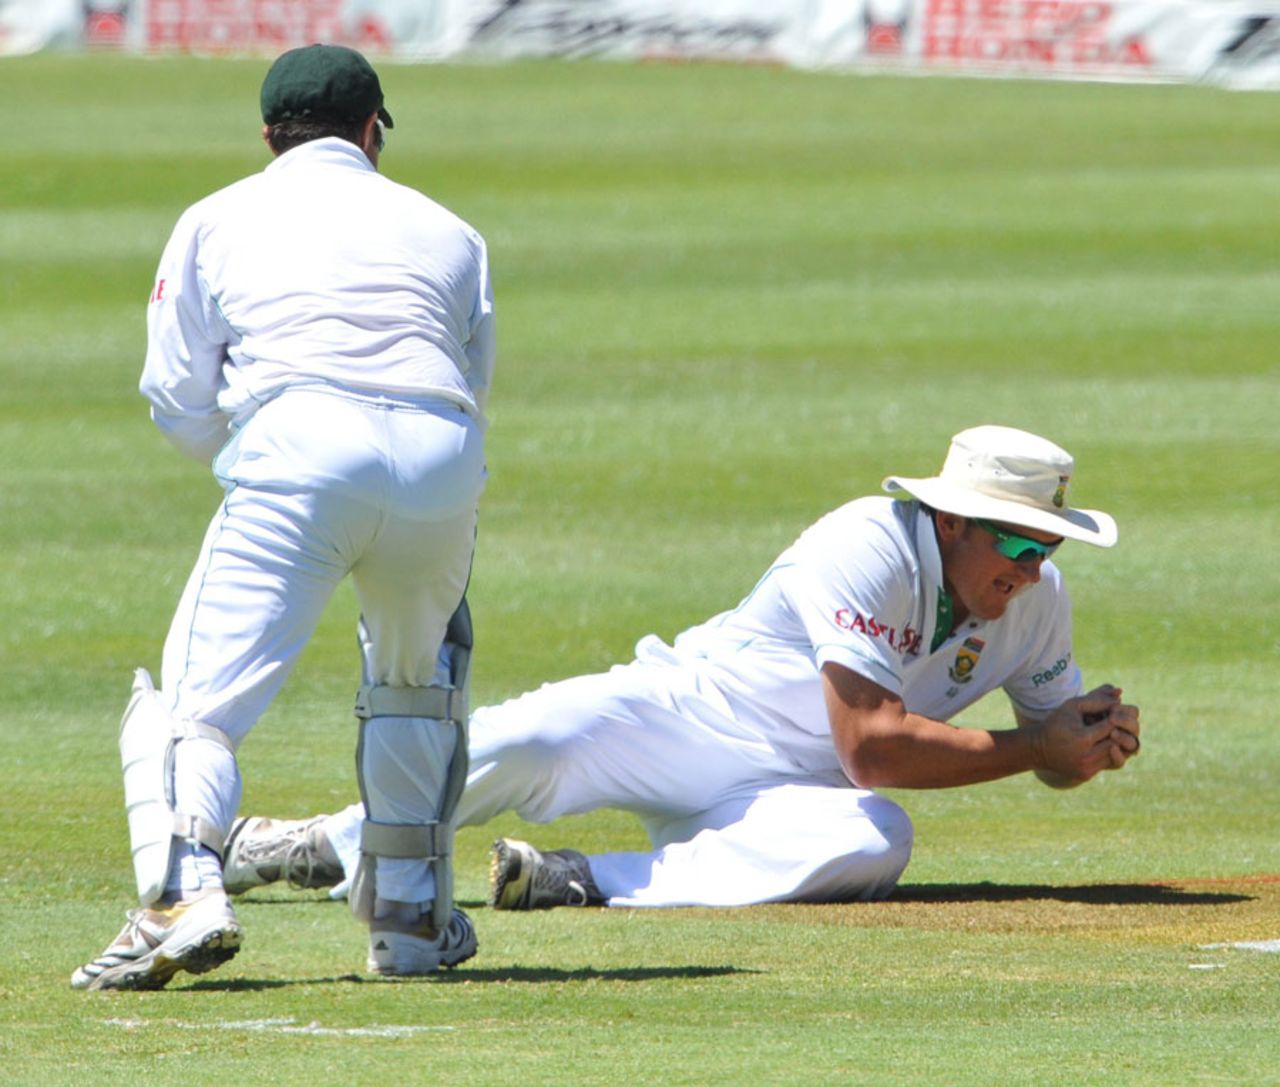 Graeme Smith pouches Virender Sehwag at first slip, South Africa v India, 3rd Test, Cape Town, 5th day, January 6, 2011